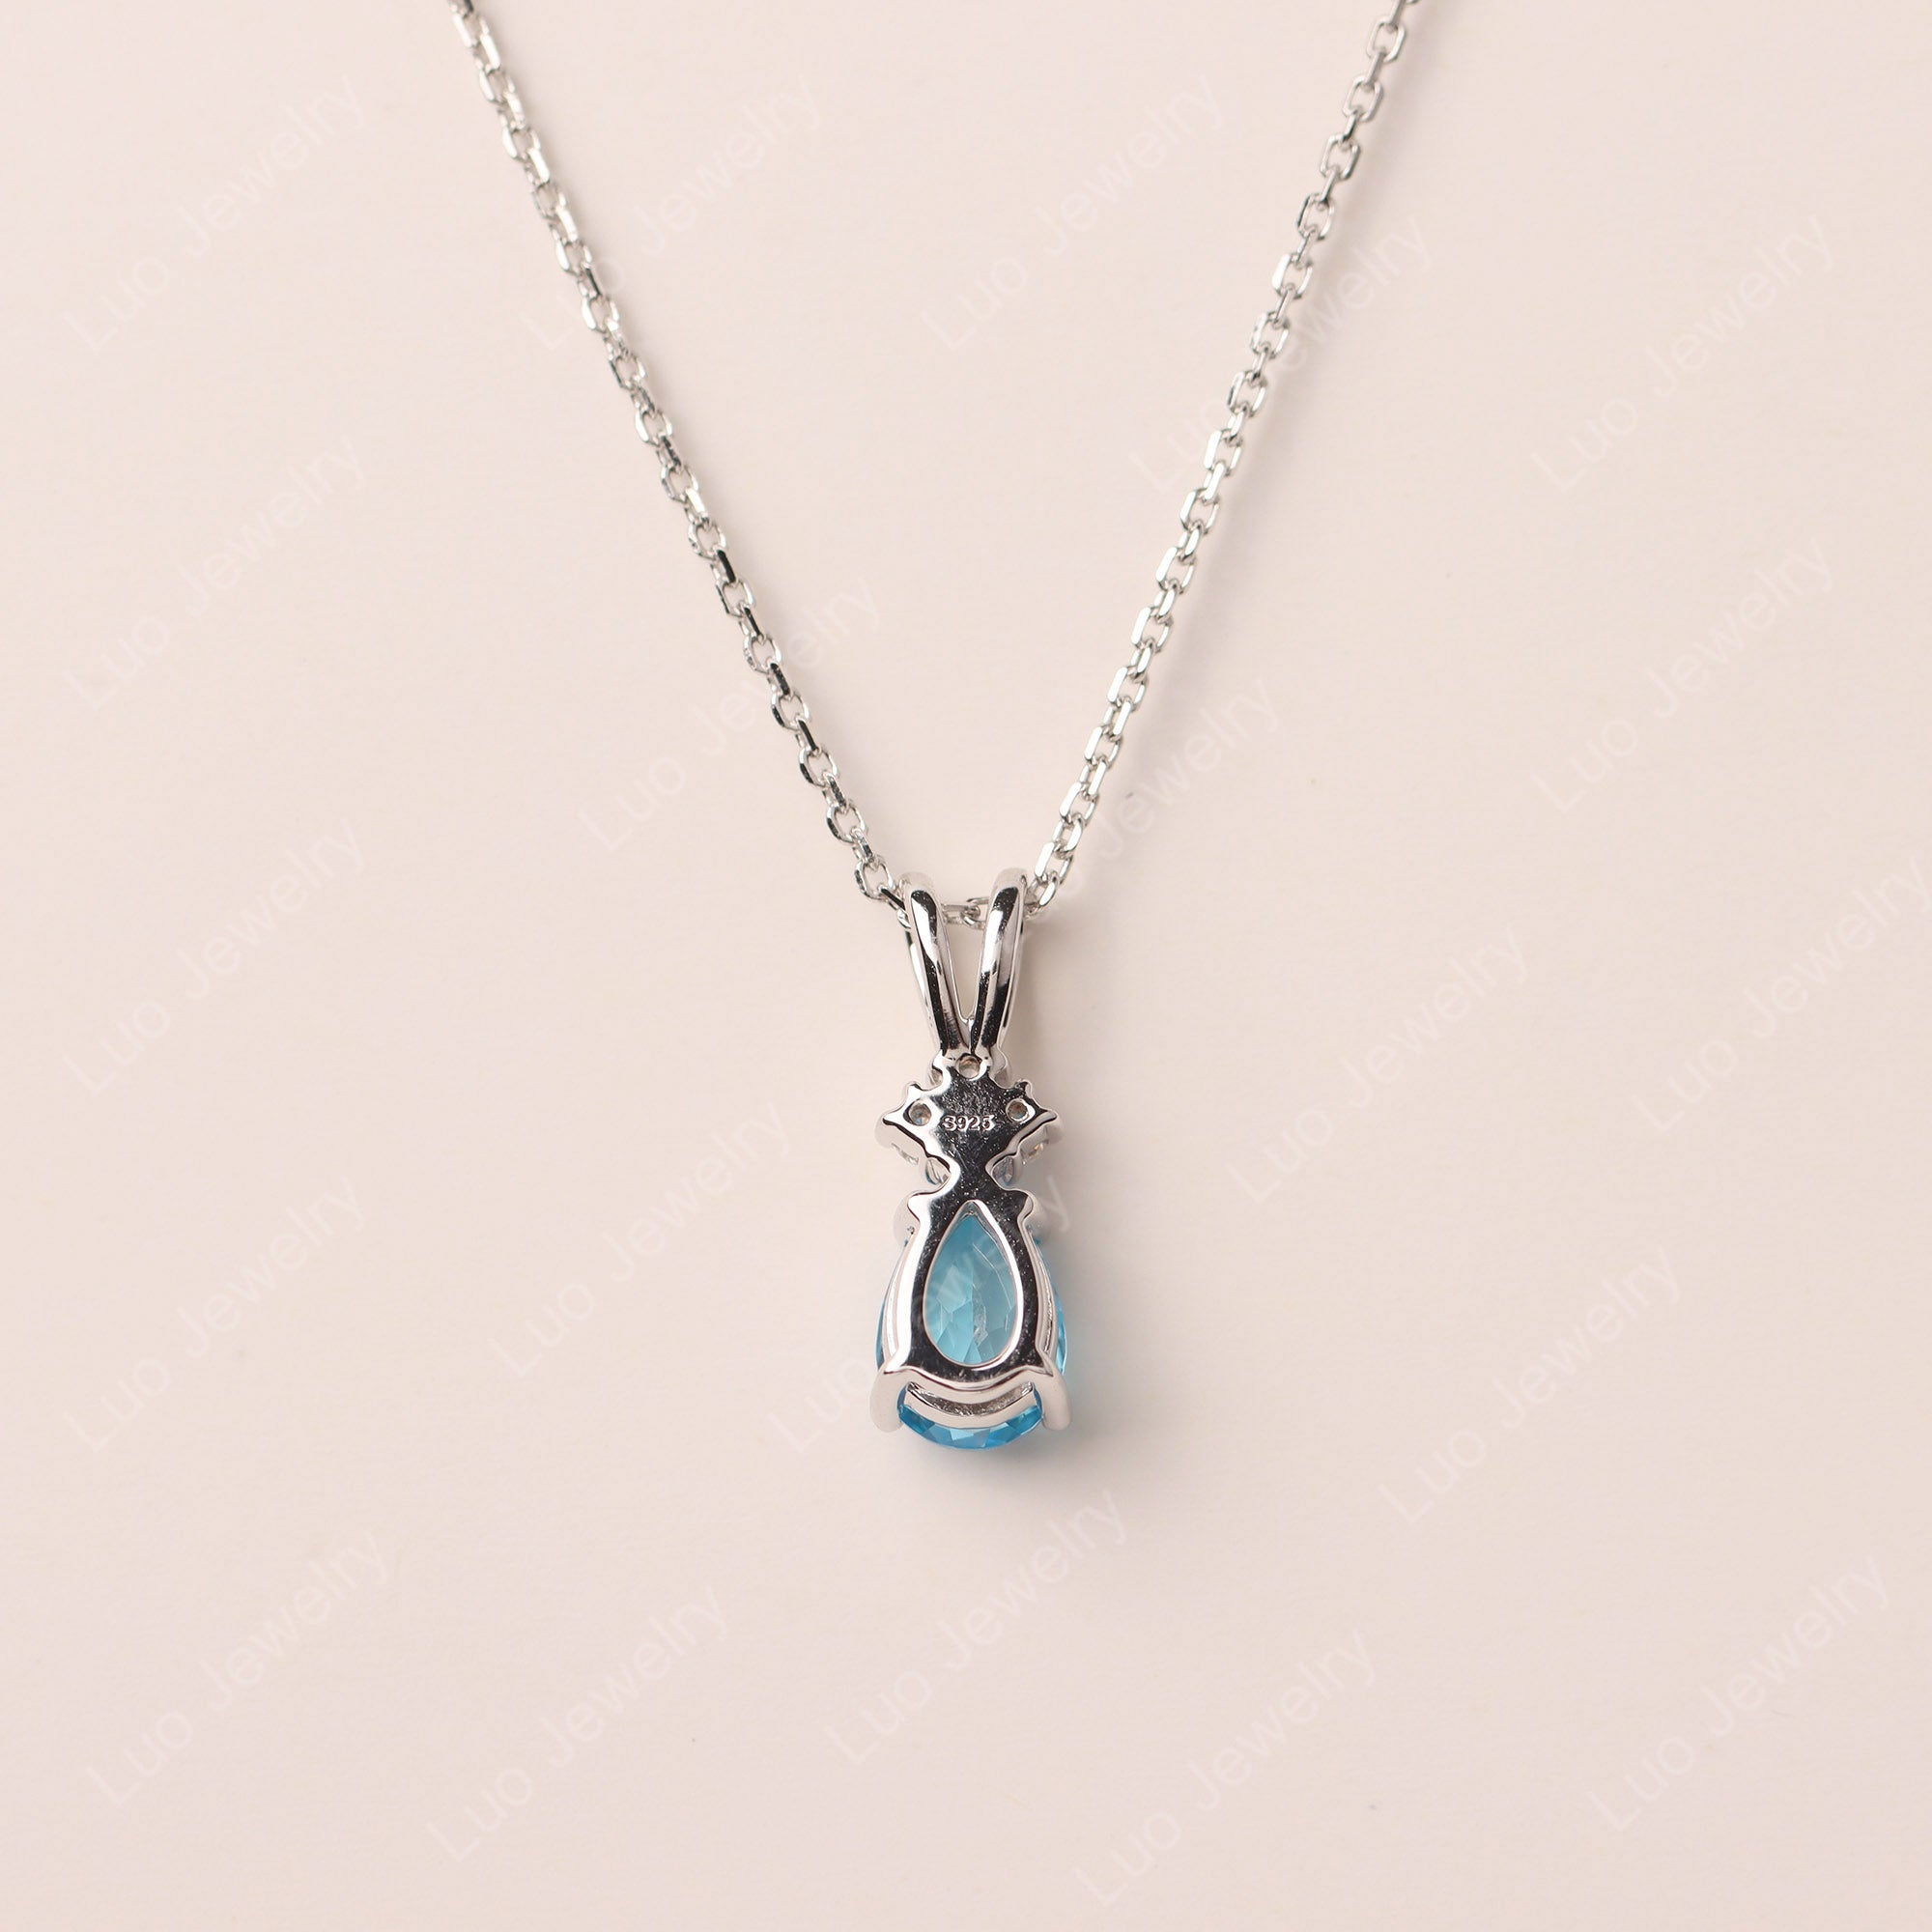 Pear Shaped Swiss Blue Topaz Necklace